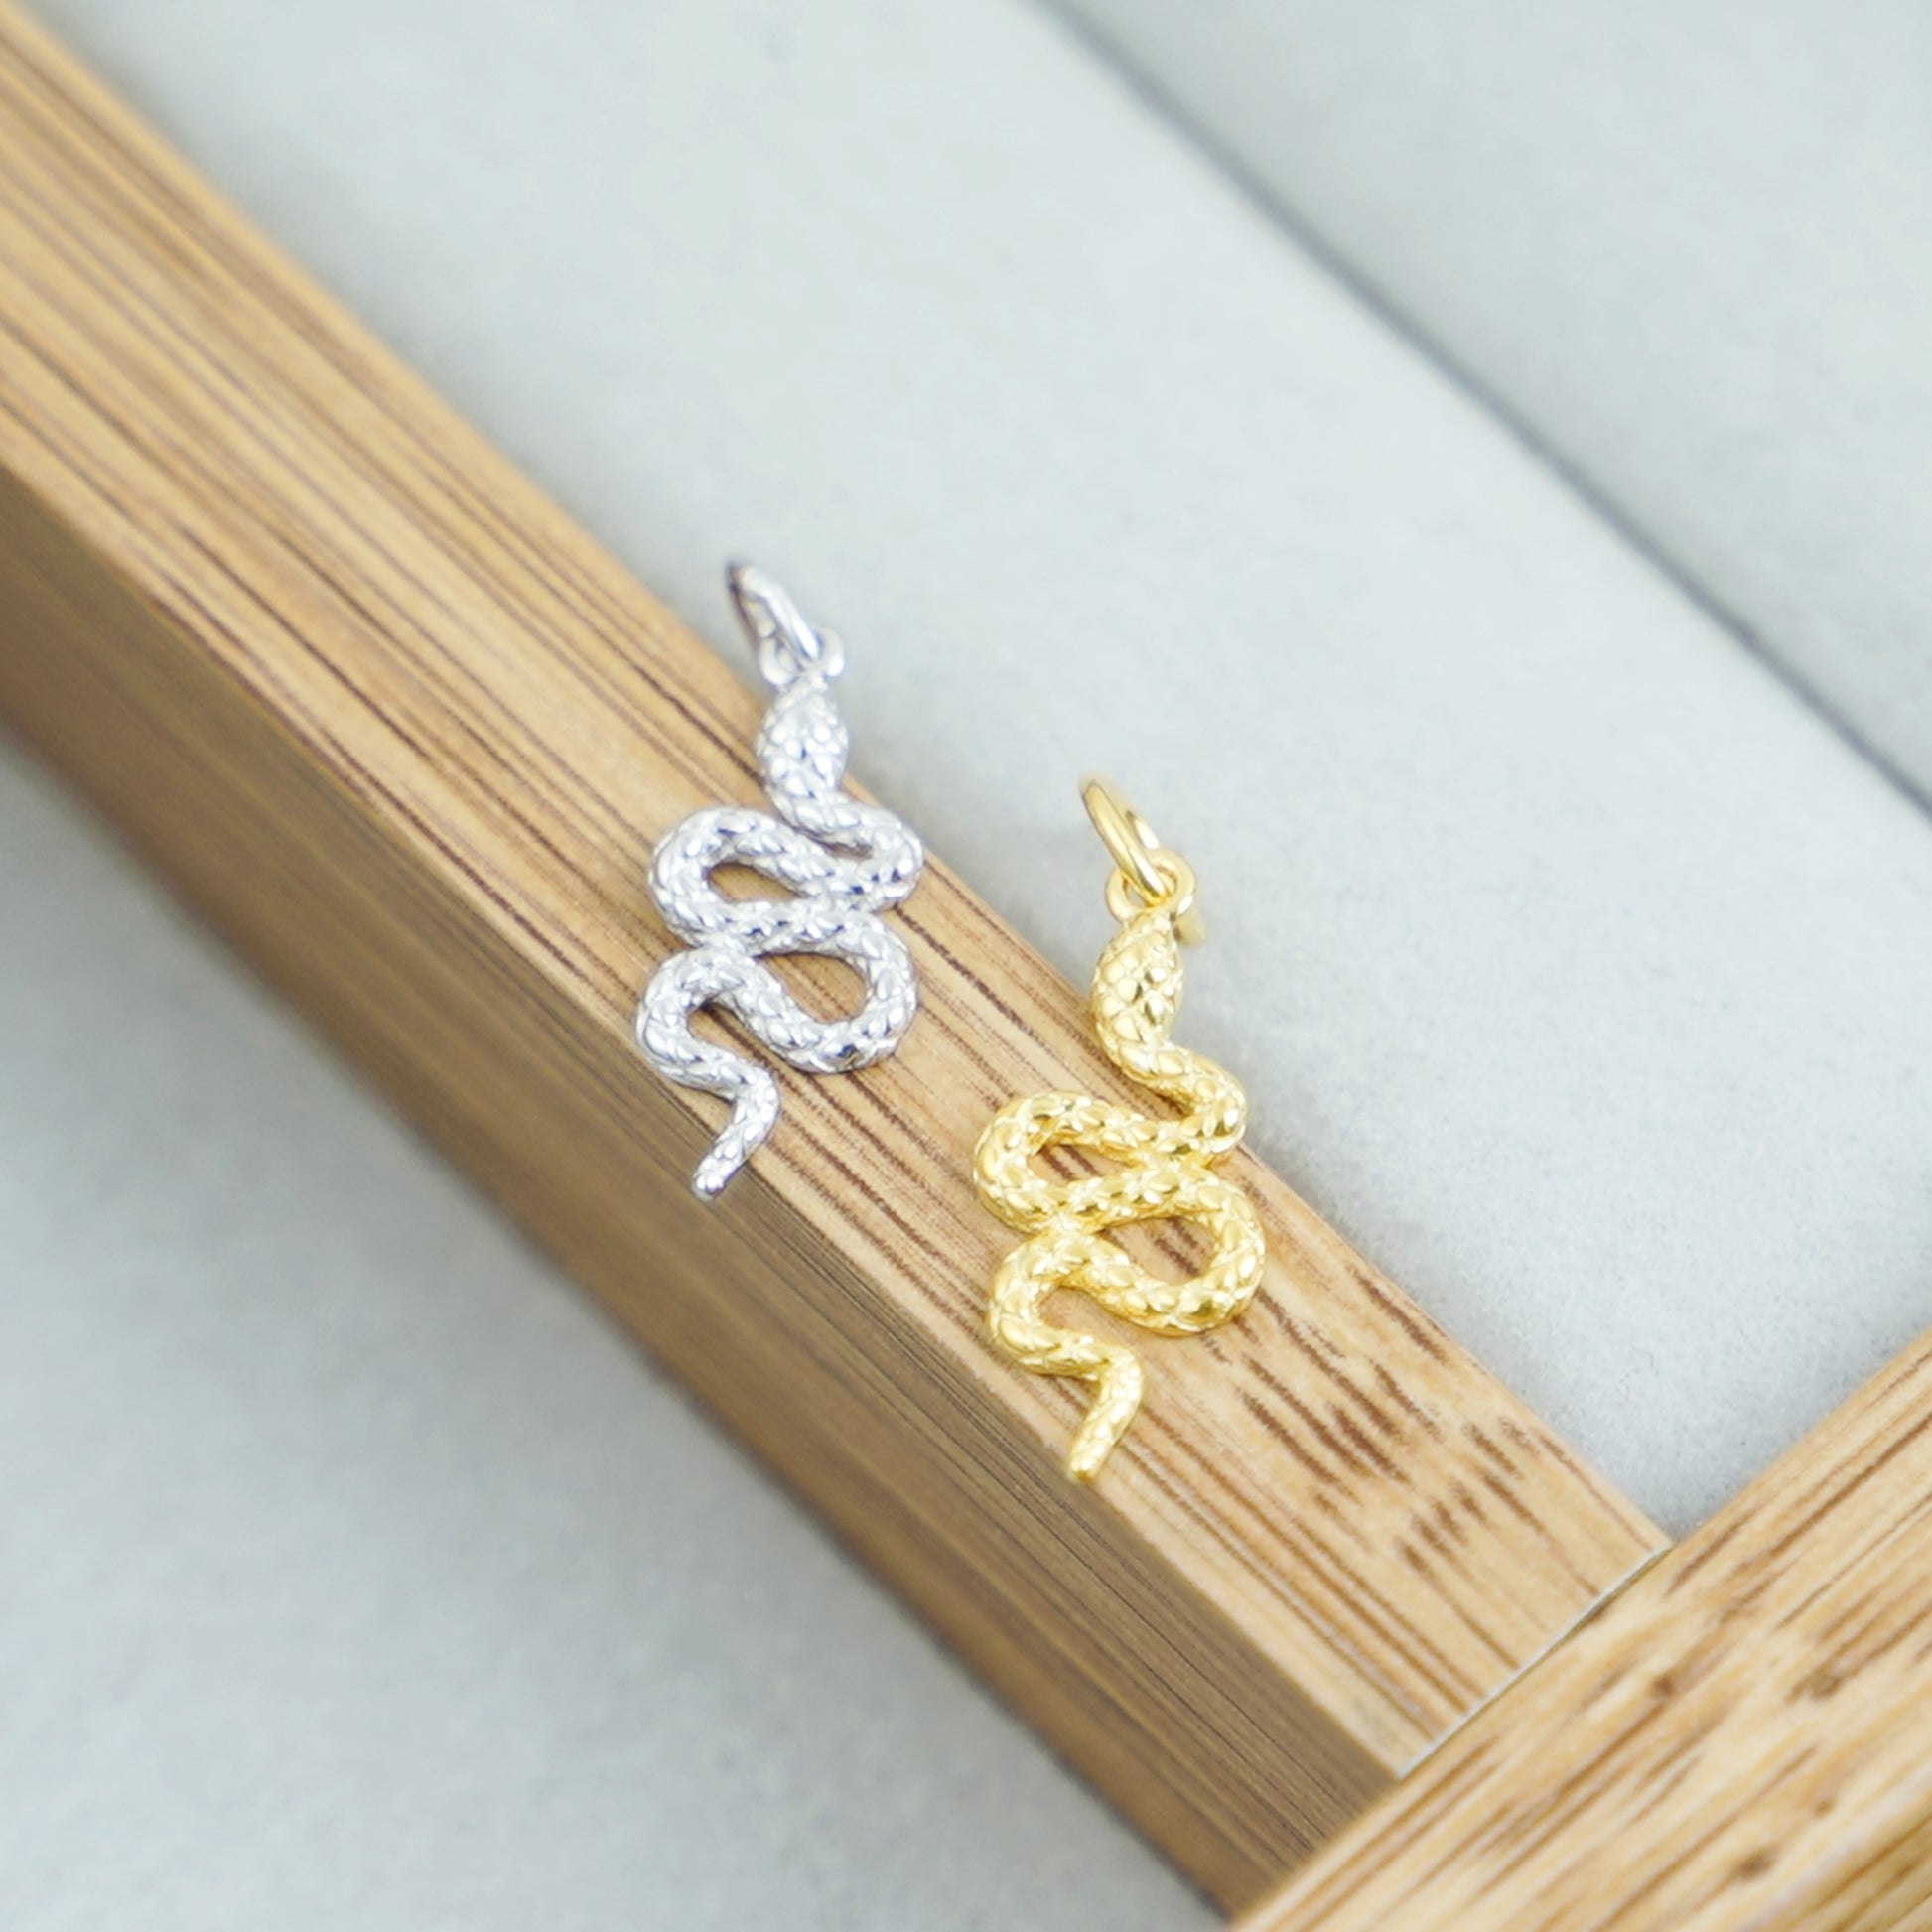 Sterling Silver Snake Pendant in 2 Tones of Rhodium and 18k Gold Plating for Earrings or Necklace - sugarkittenlondon